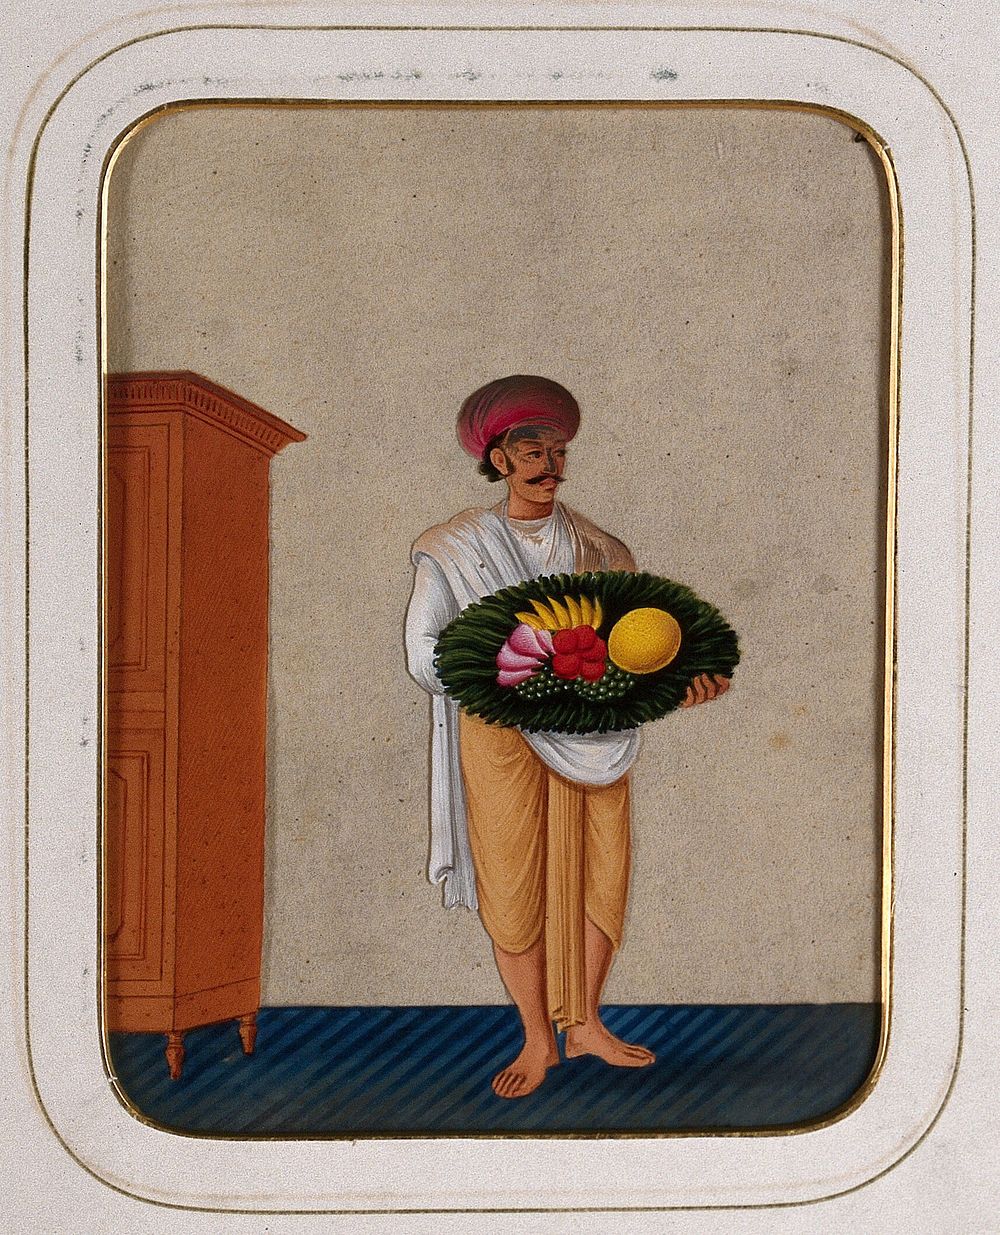 A servant holding a platter of fruit. Gouache painting on mica by an Indian artist.